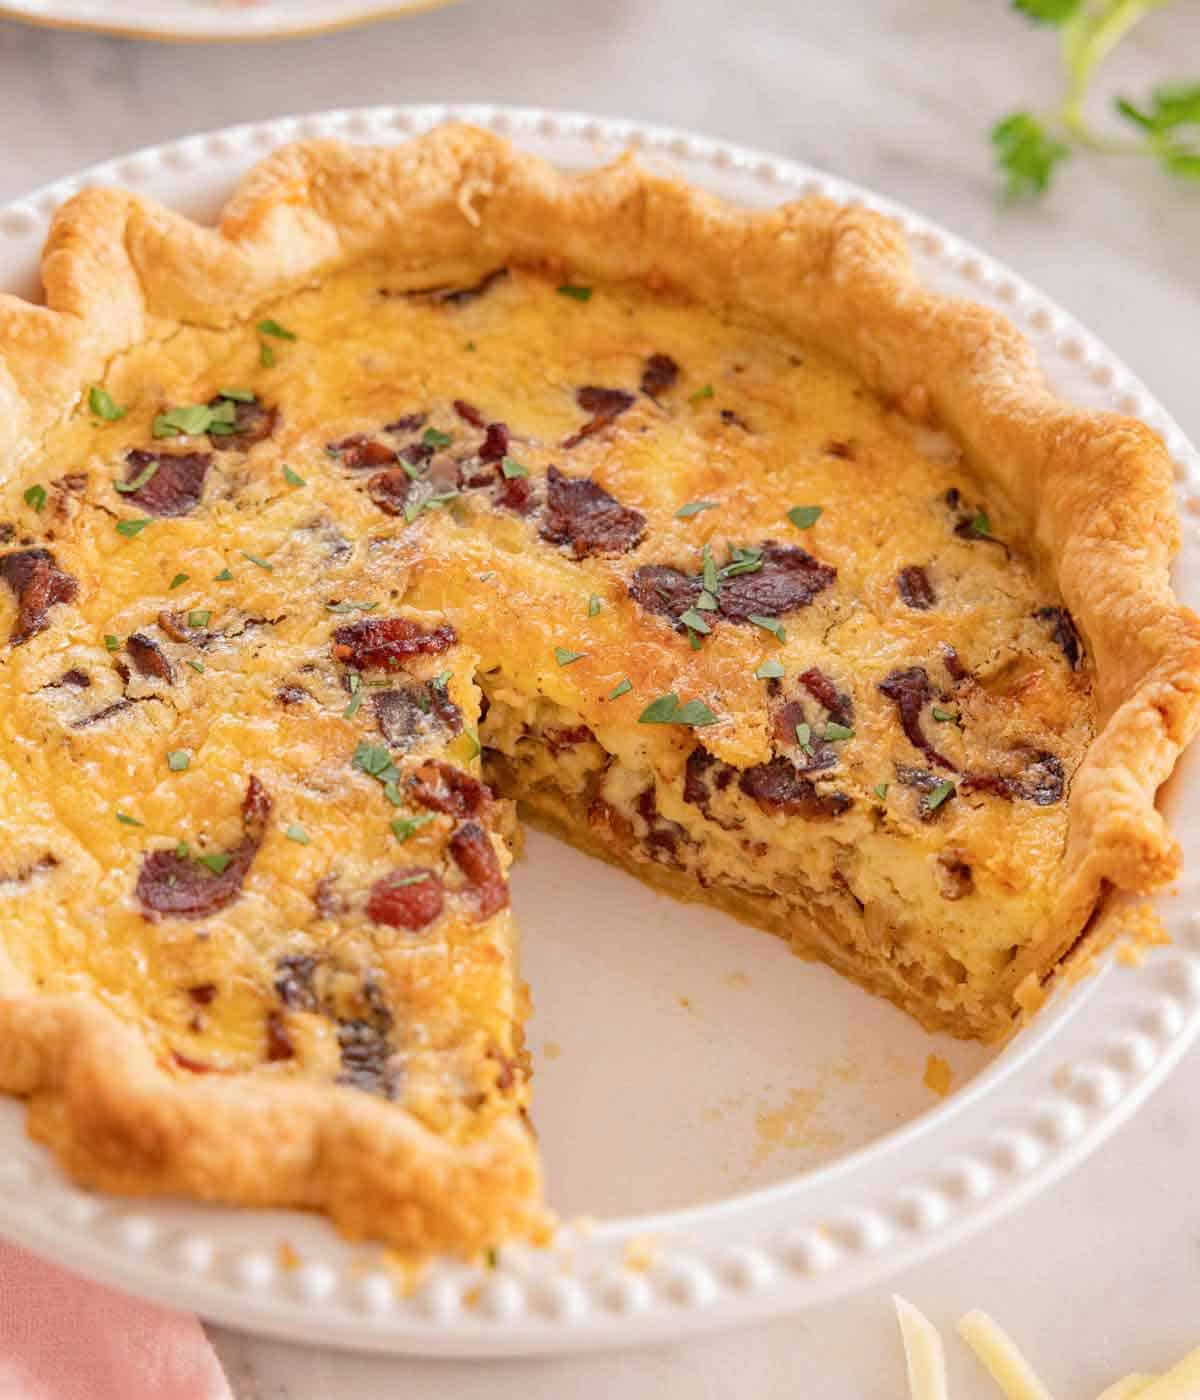 A quiche Lorraine in a pie dish with a slice removed.